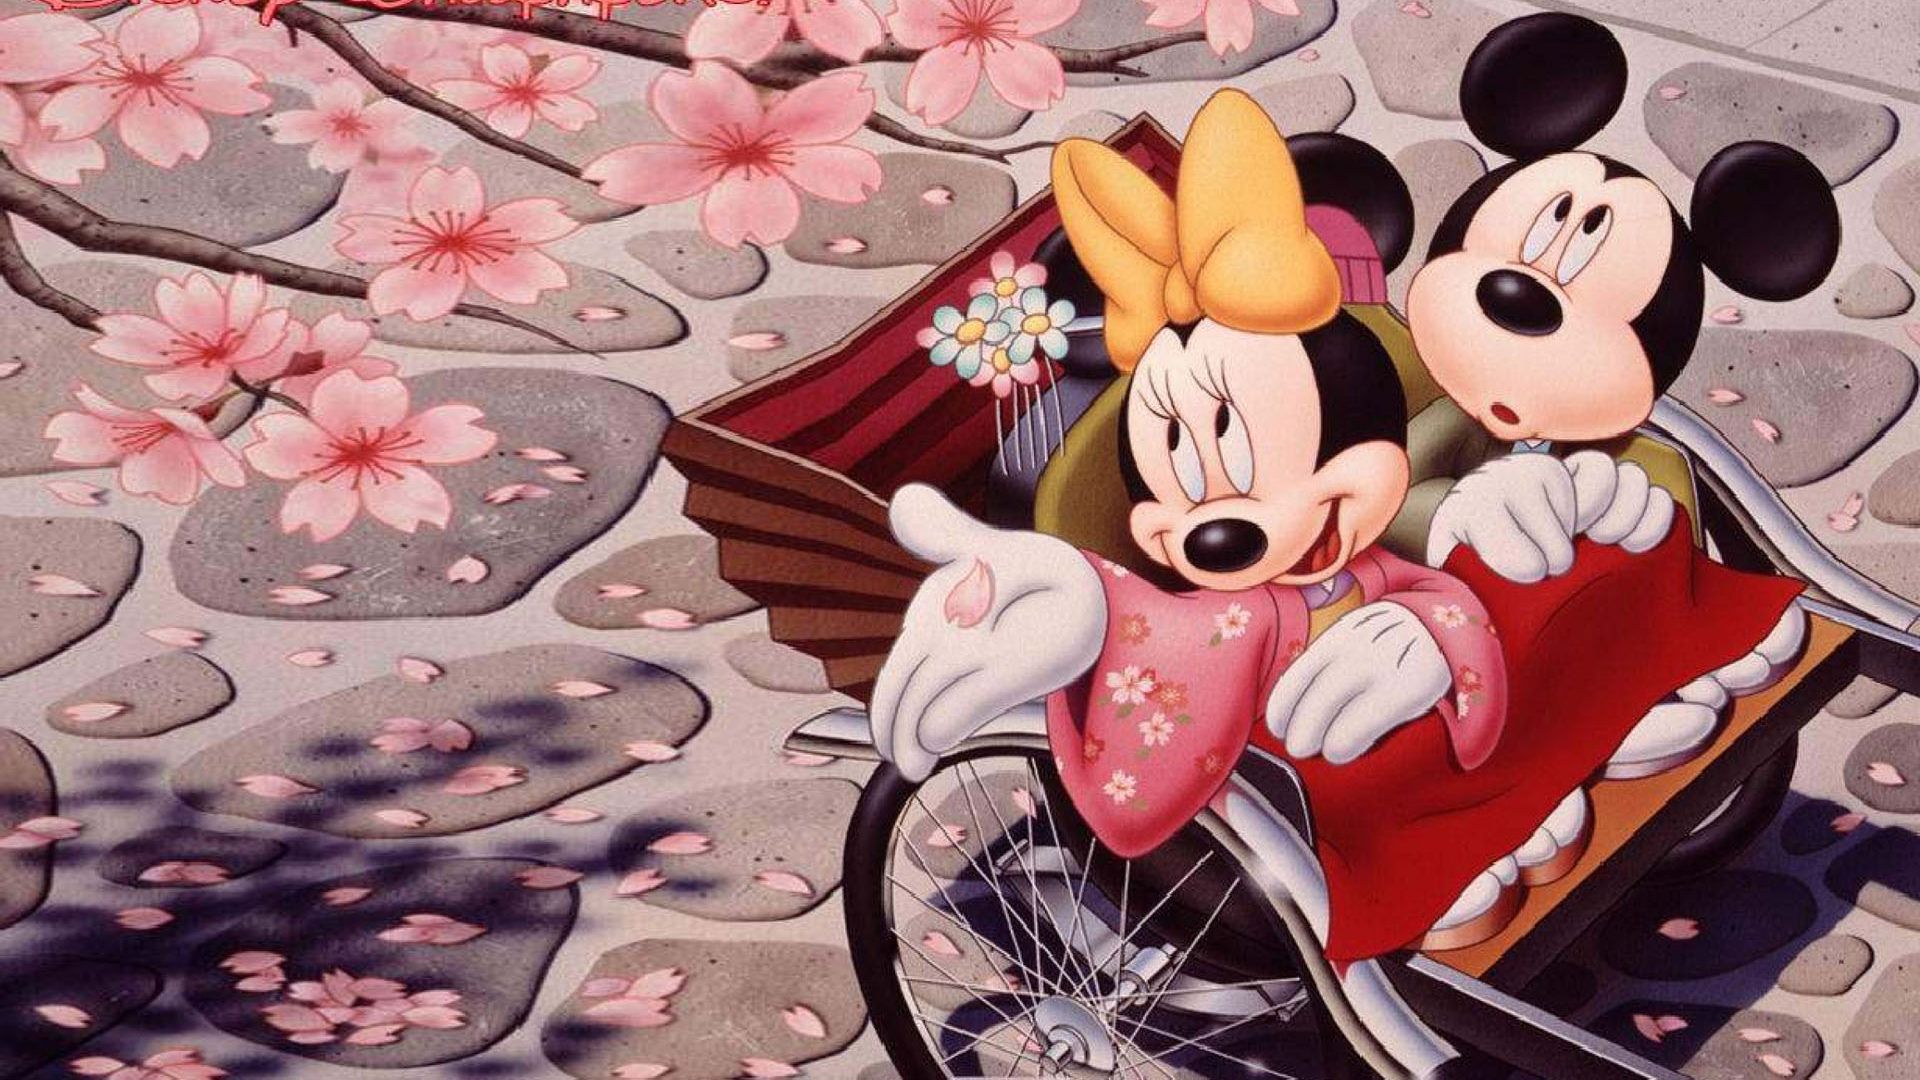  Minnie Mouse Hintergrundbild 1920x1080. Romantic Mickey Mouse And Minnie Mouse Japanese Cherry Blossom Wallpaper : Wallpaper13.com